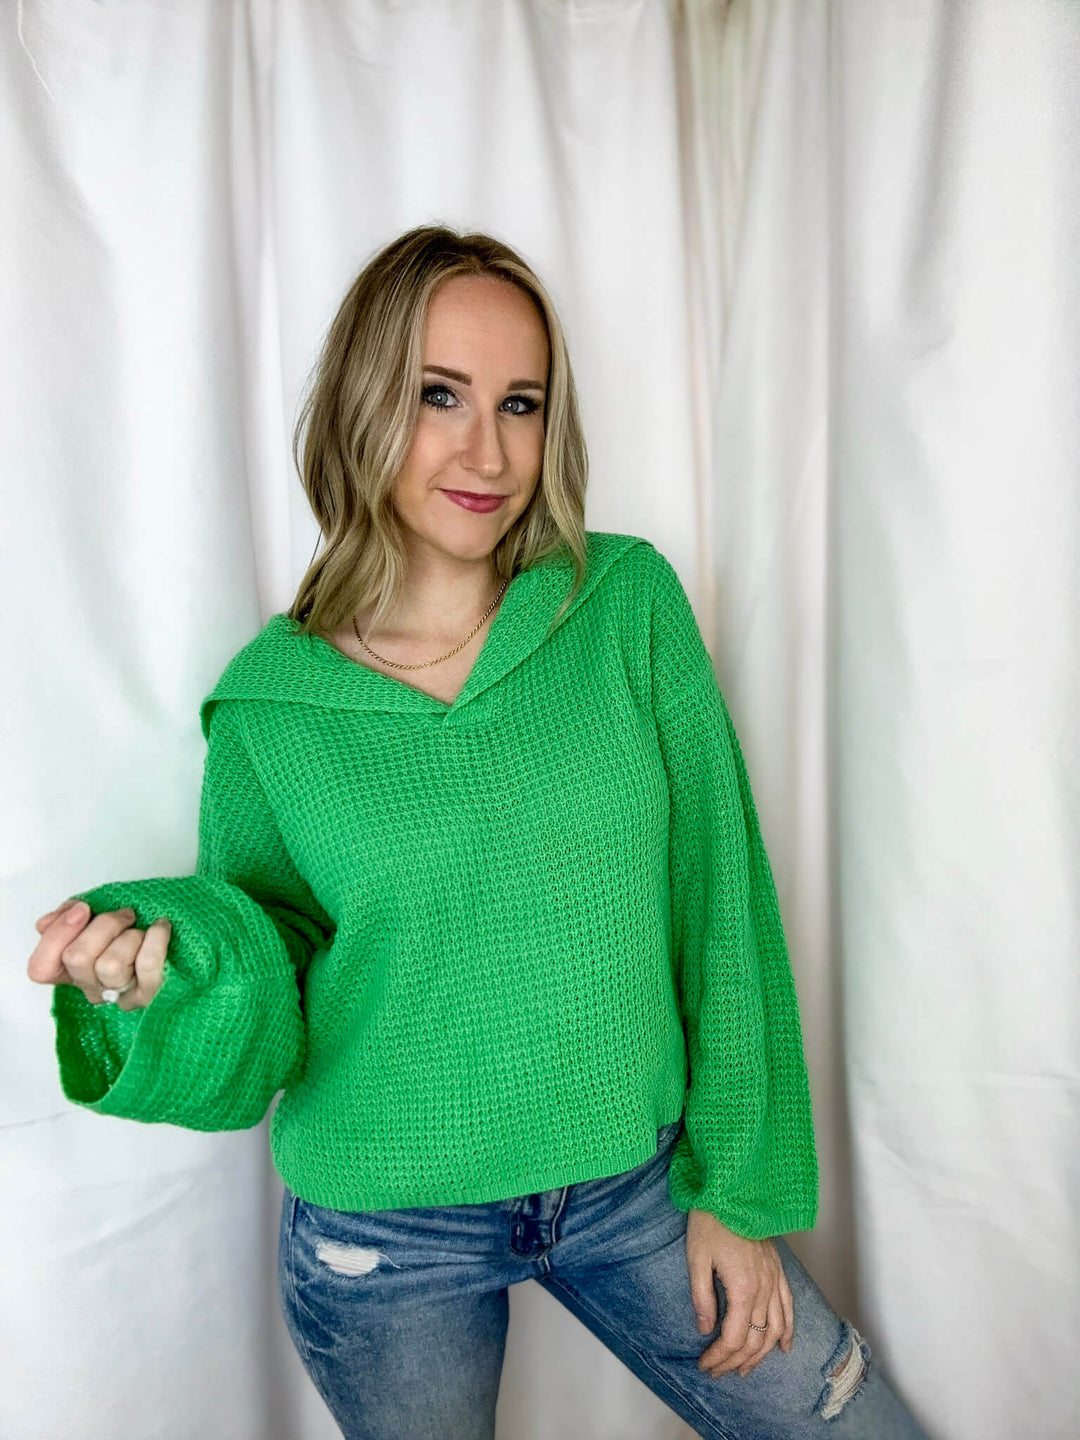 Go Getter Collared Sweater Top